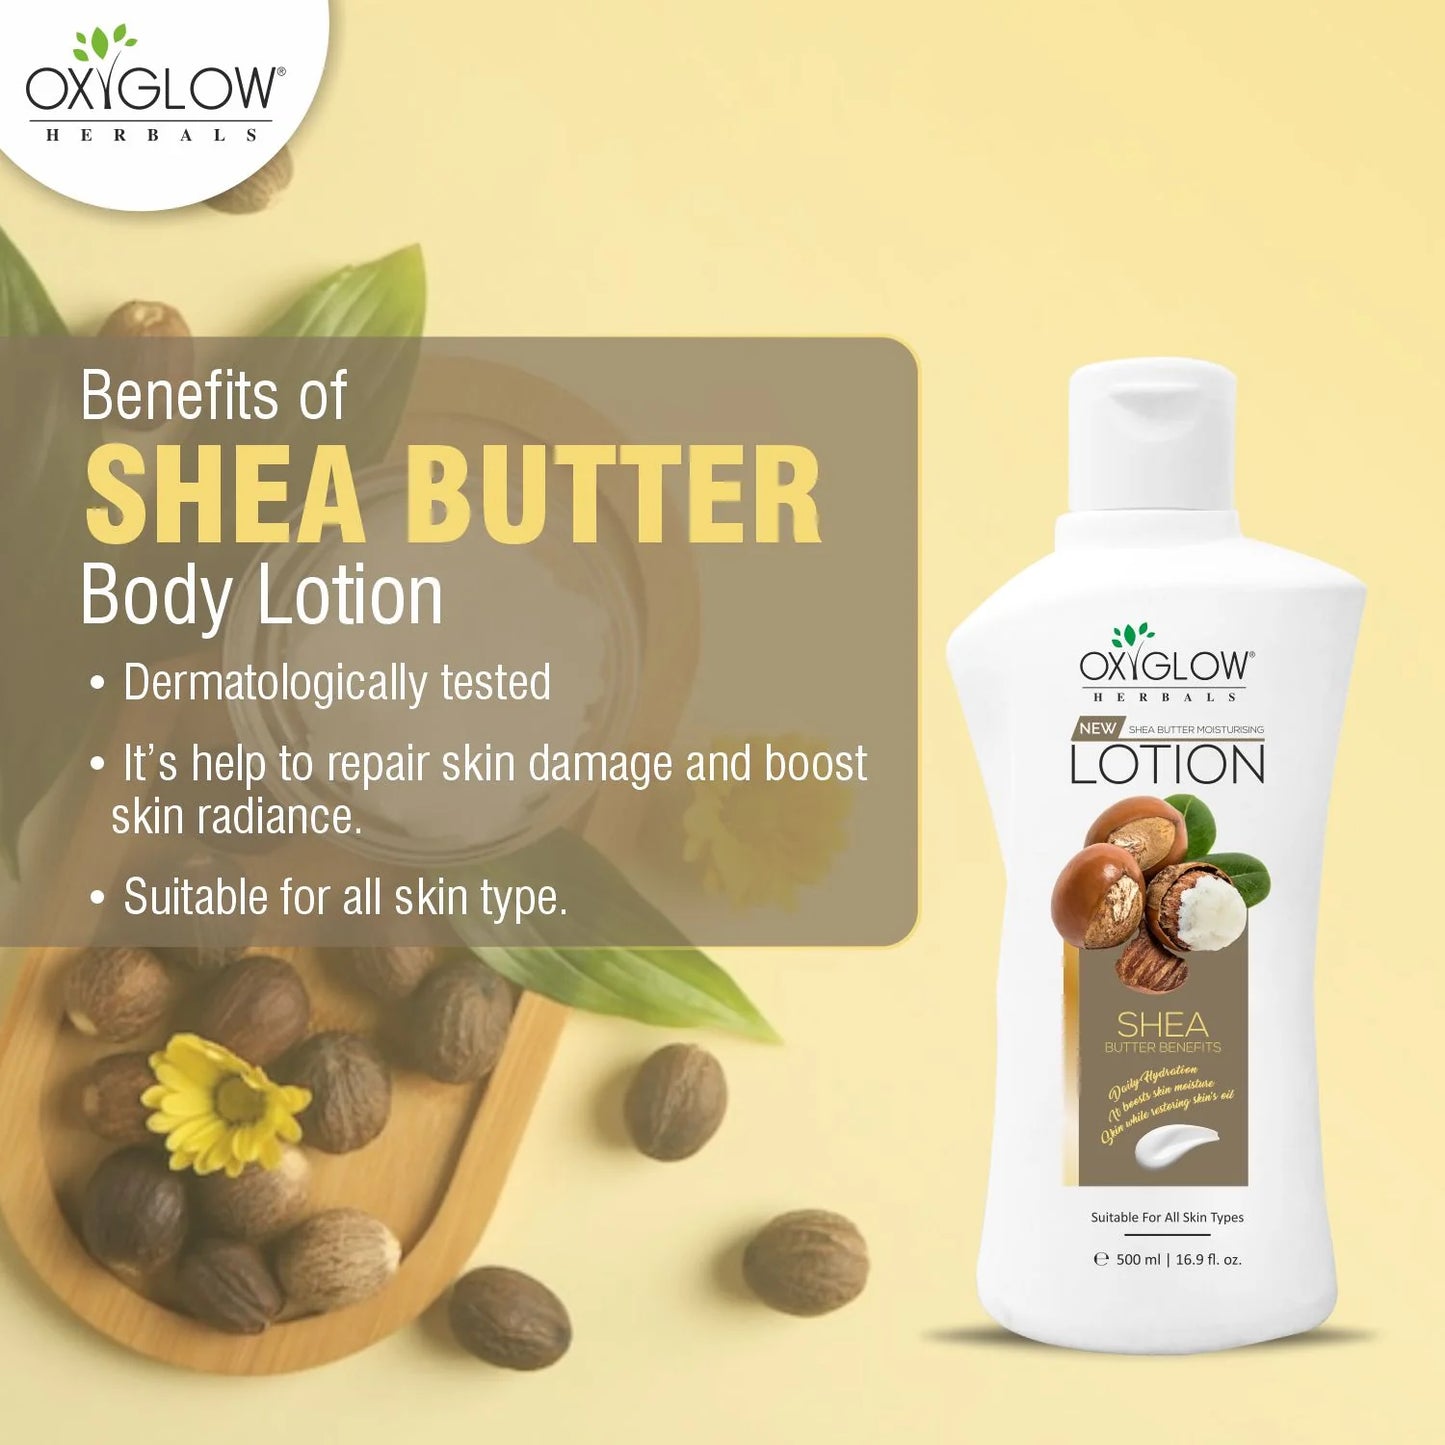 Buy Online Oxyglow Herbals New Shea Butter Moisturising Lotion - 500 ml | Suitable For All Skin Types at best Prize in India